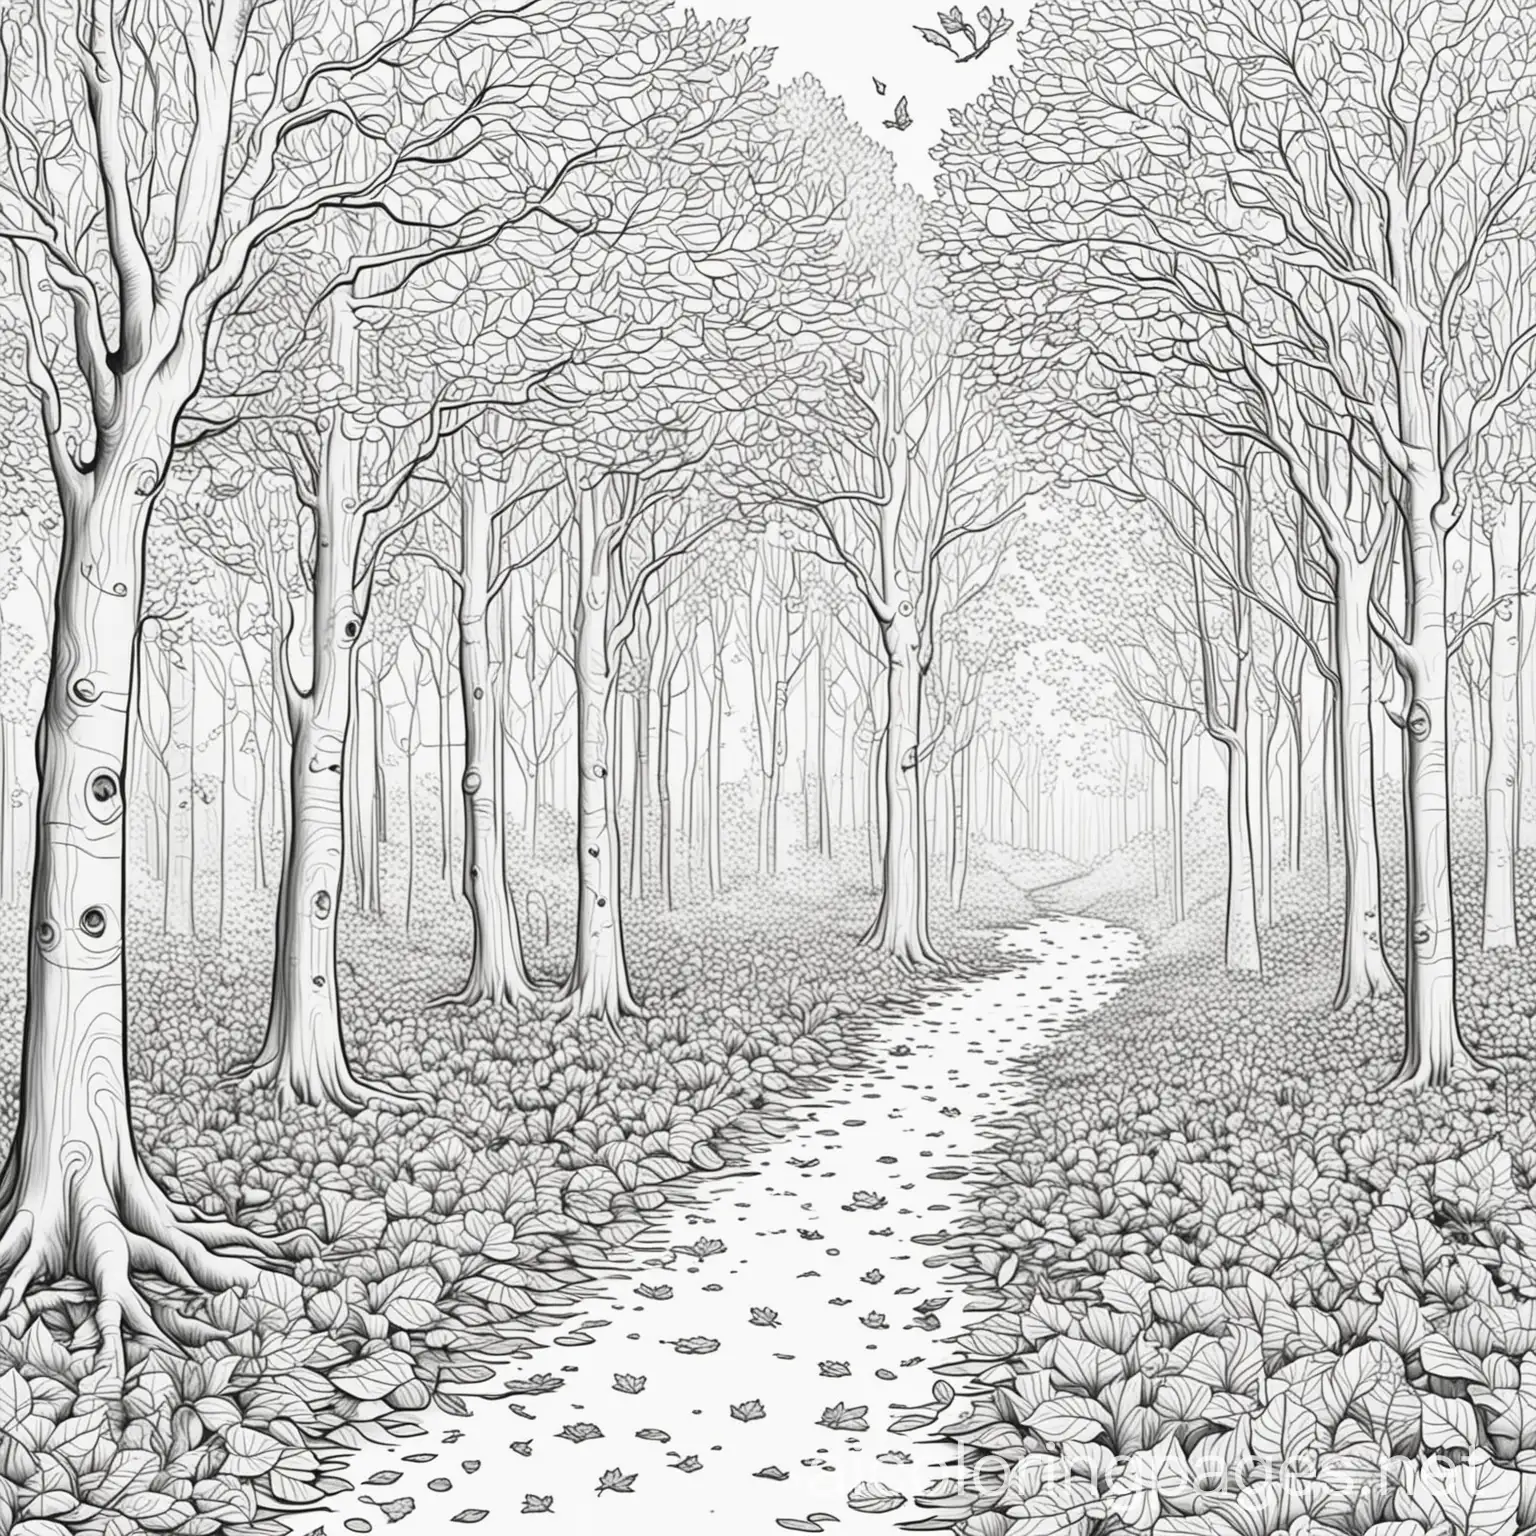 An autumn forest with trees shedding their colorful leaves, Coloring Page, black and white, line art, white background, Simplicity, Ample White Space. The background of the coloring page is plain white to make it easy for young children to color within the lines. The outlines of all the subjects are easy to distinguish, making it simple for kids to color without too much difficulty